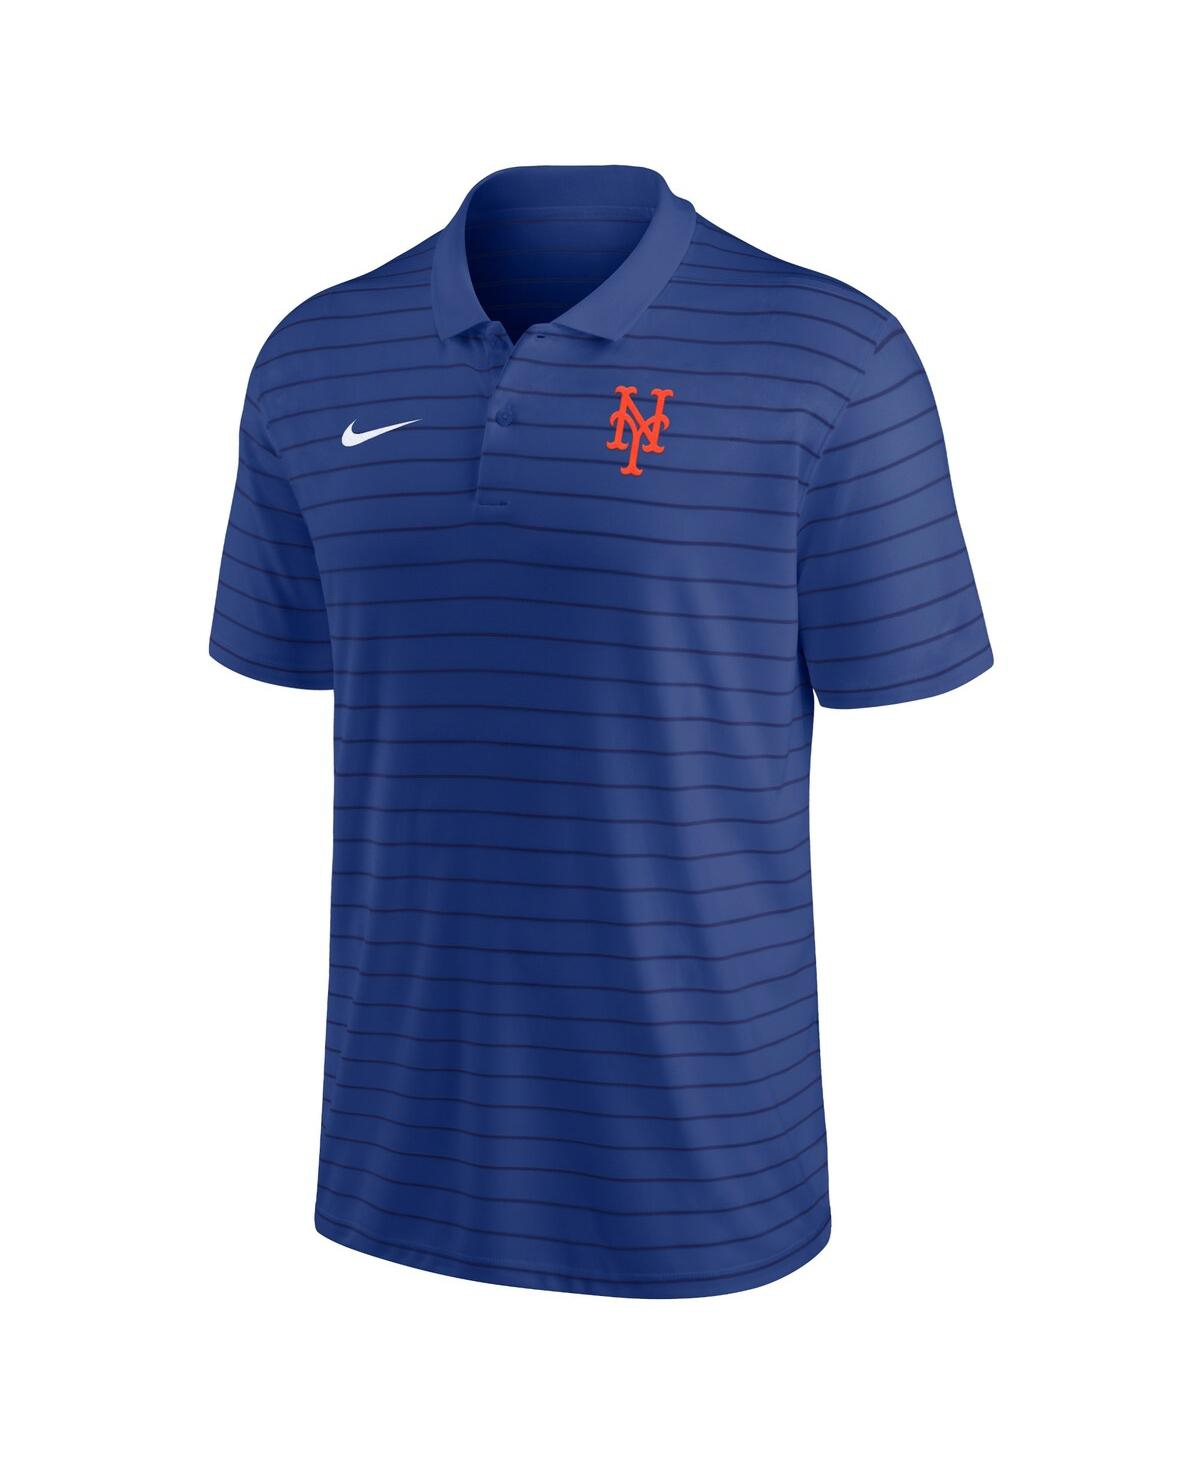 Shop Nike Men's  Royal New York Mets Authentic Collection Victory Striped Performance Polo Shirt